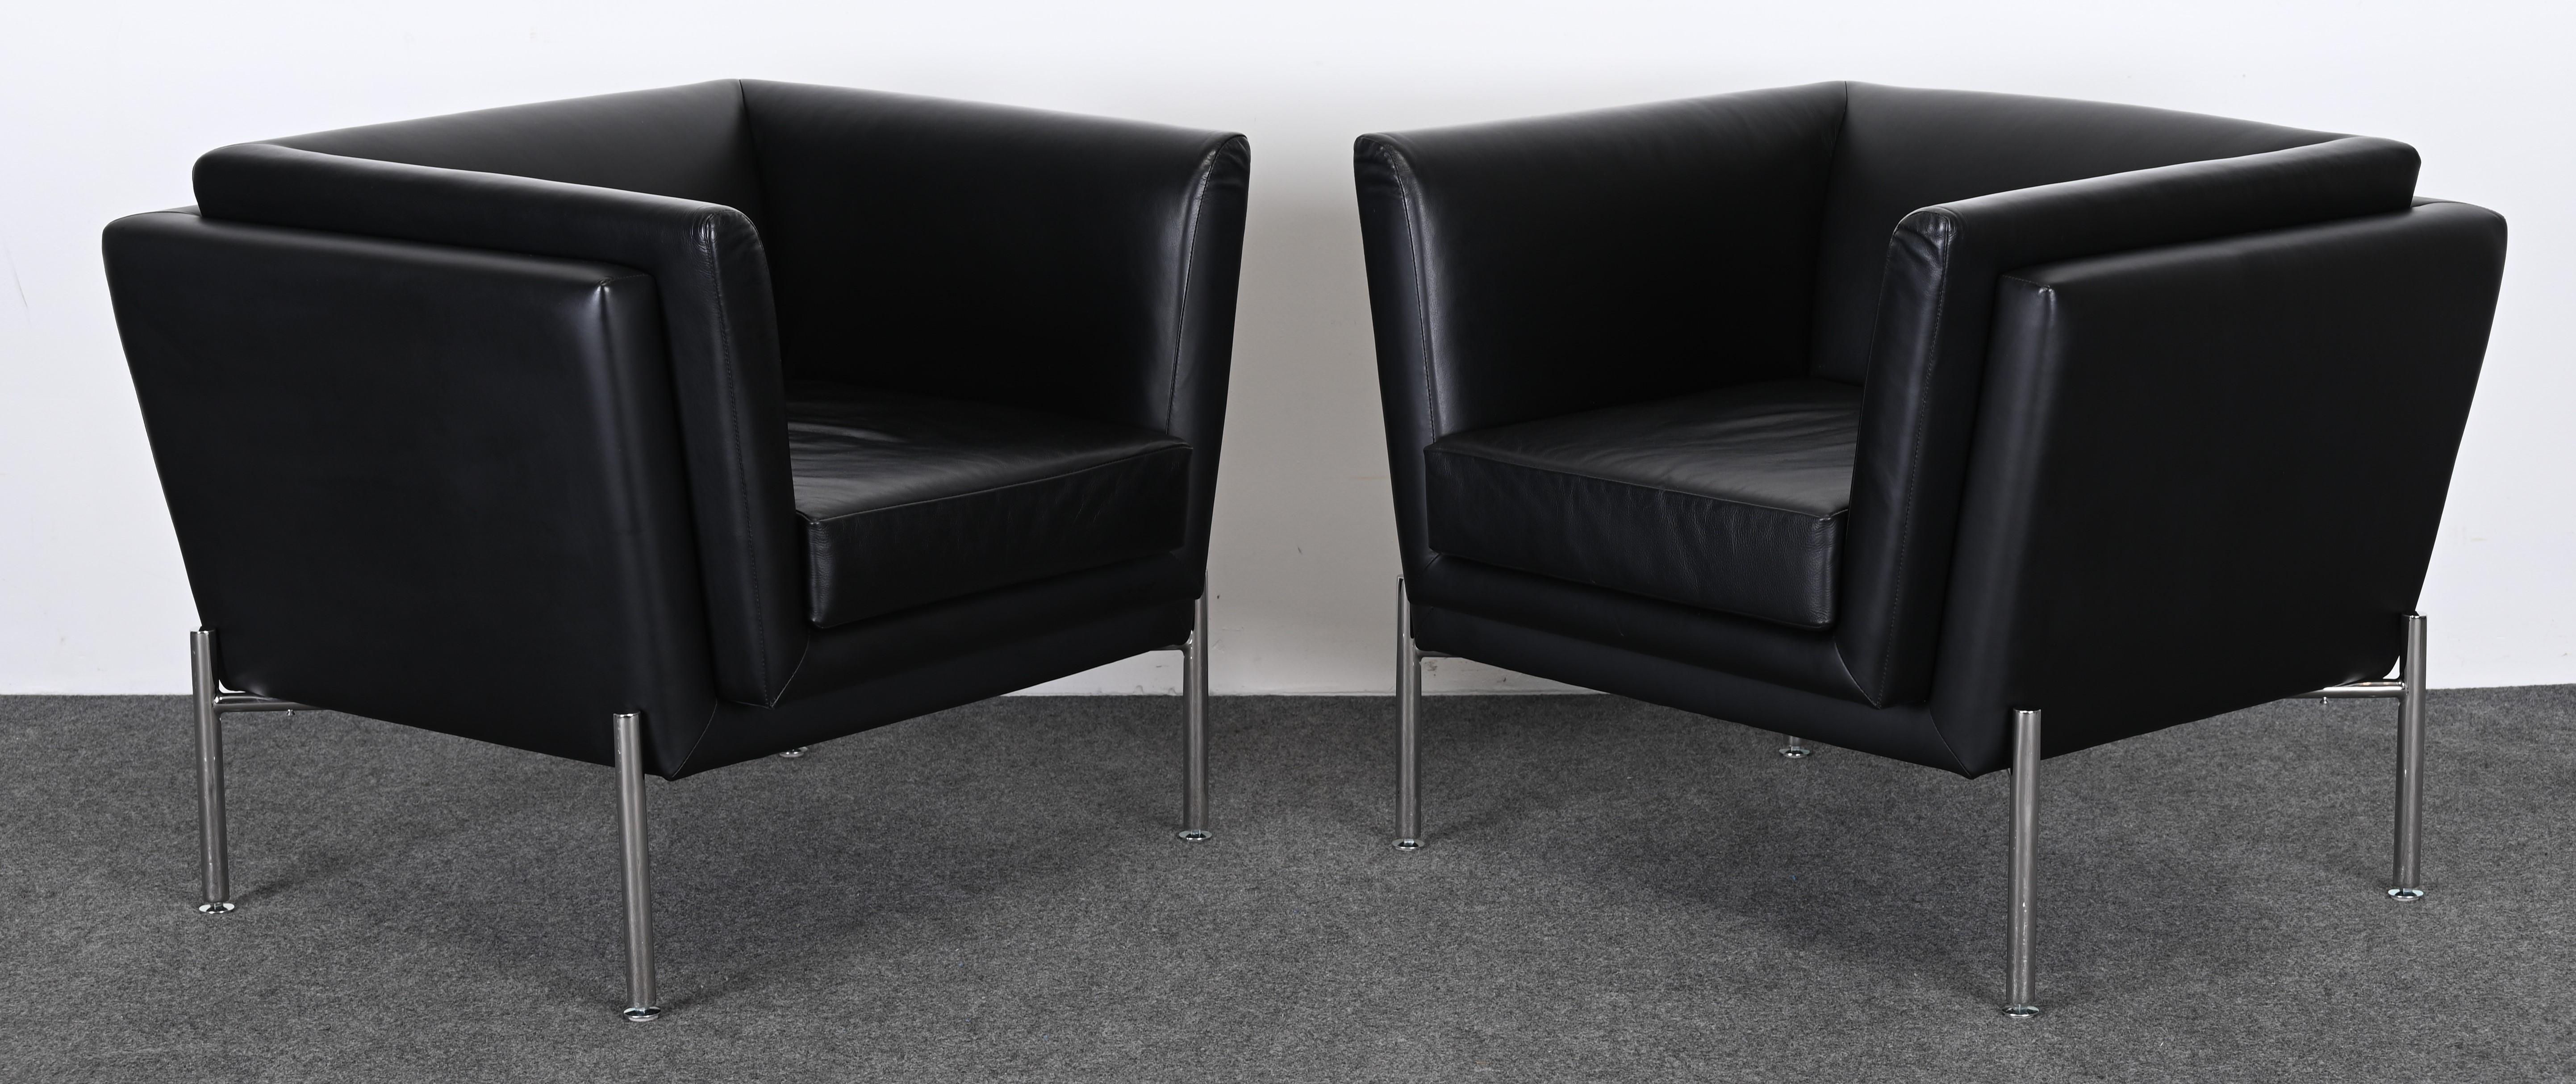 Pair of Leather and Stainless Steel Lounge Chairs by Brueton, 20th Century For Sale 1